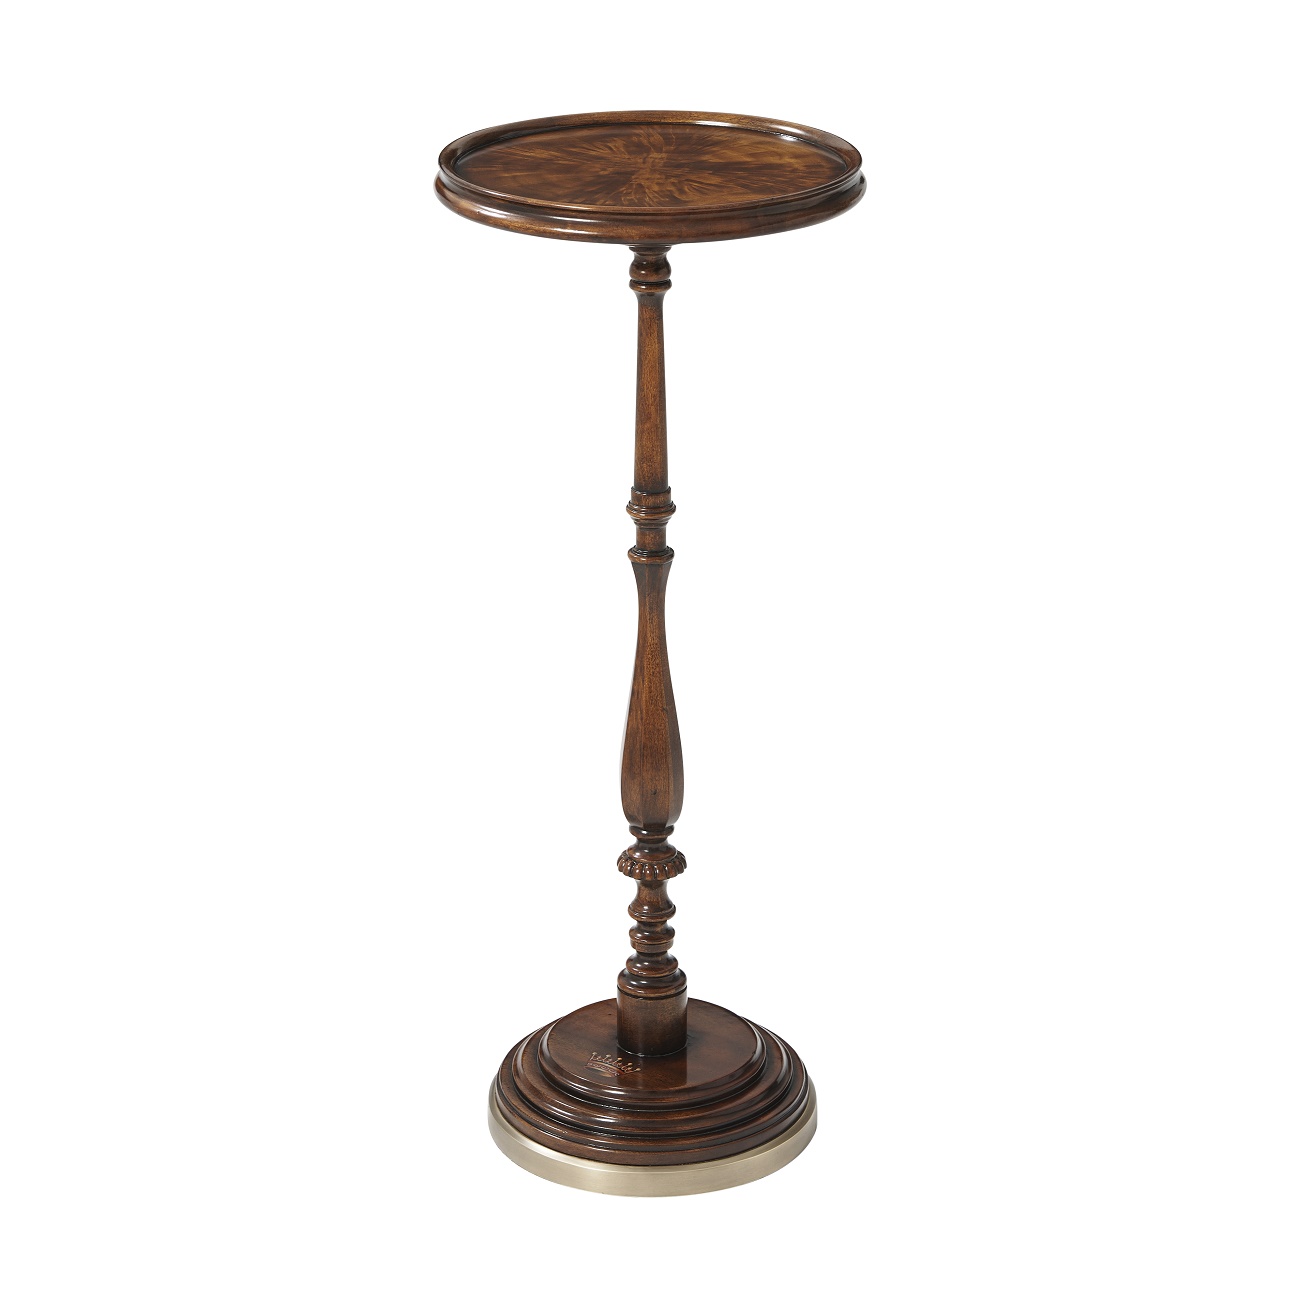 Sunderland Candle Stand Accent Table, Theodore Alexander Table, Brooklyn, New York, Furniture by ABD